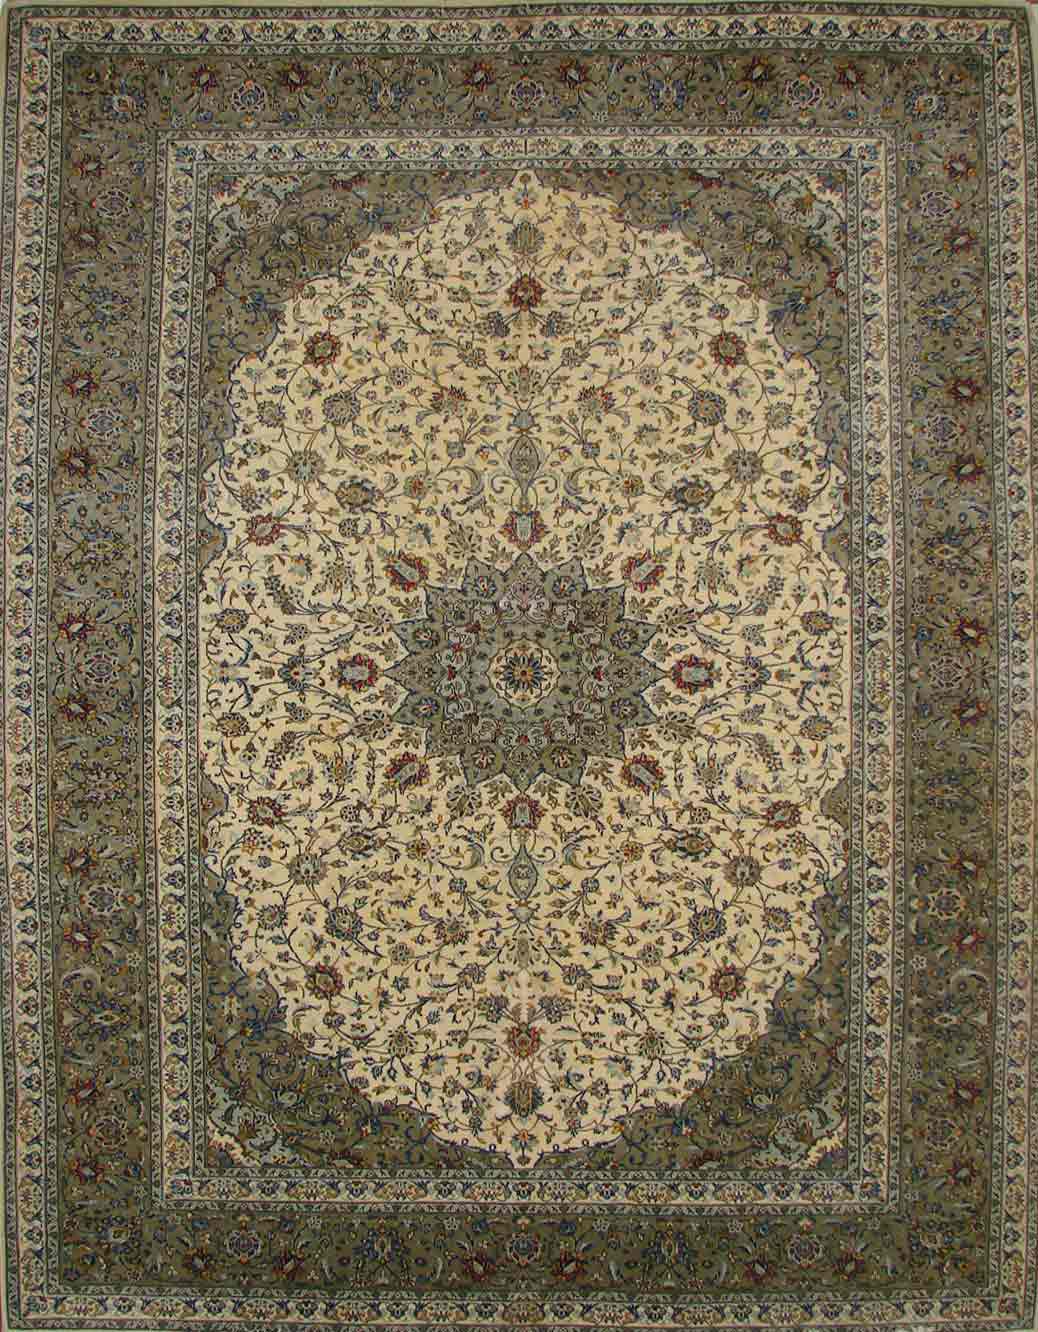 Persian & Antique Reproduction Rugs KASHAN 62913 Ivory - Beige & Aqua - Lt. Green Hand Knotted Rug